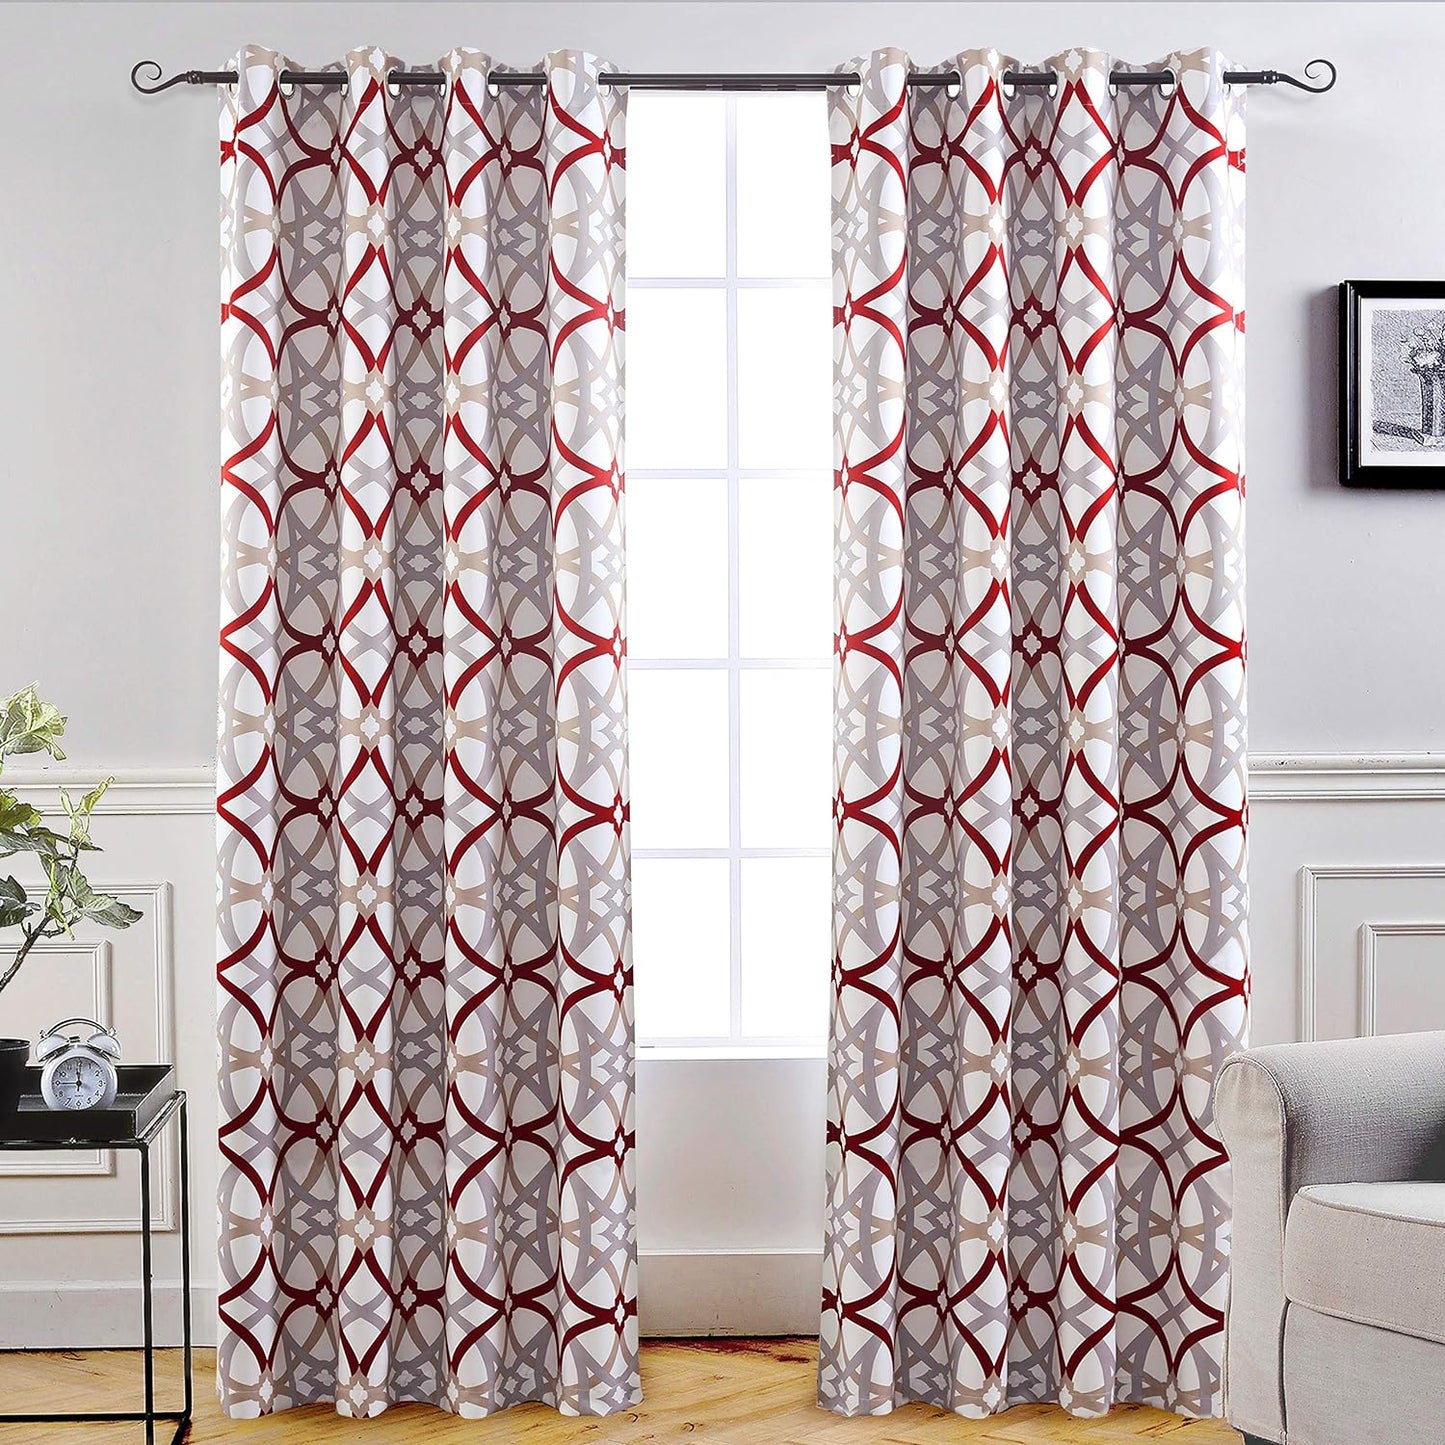 Driftaway Alexander Thermal Blackout Grommet Unlined Window Curtains Spiral Geo Trellis Pattern Set of 2 Panels Each Size 52 Inch by 84 Inch Red and Gray  DriftAway Red/Gray 52"X96" 